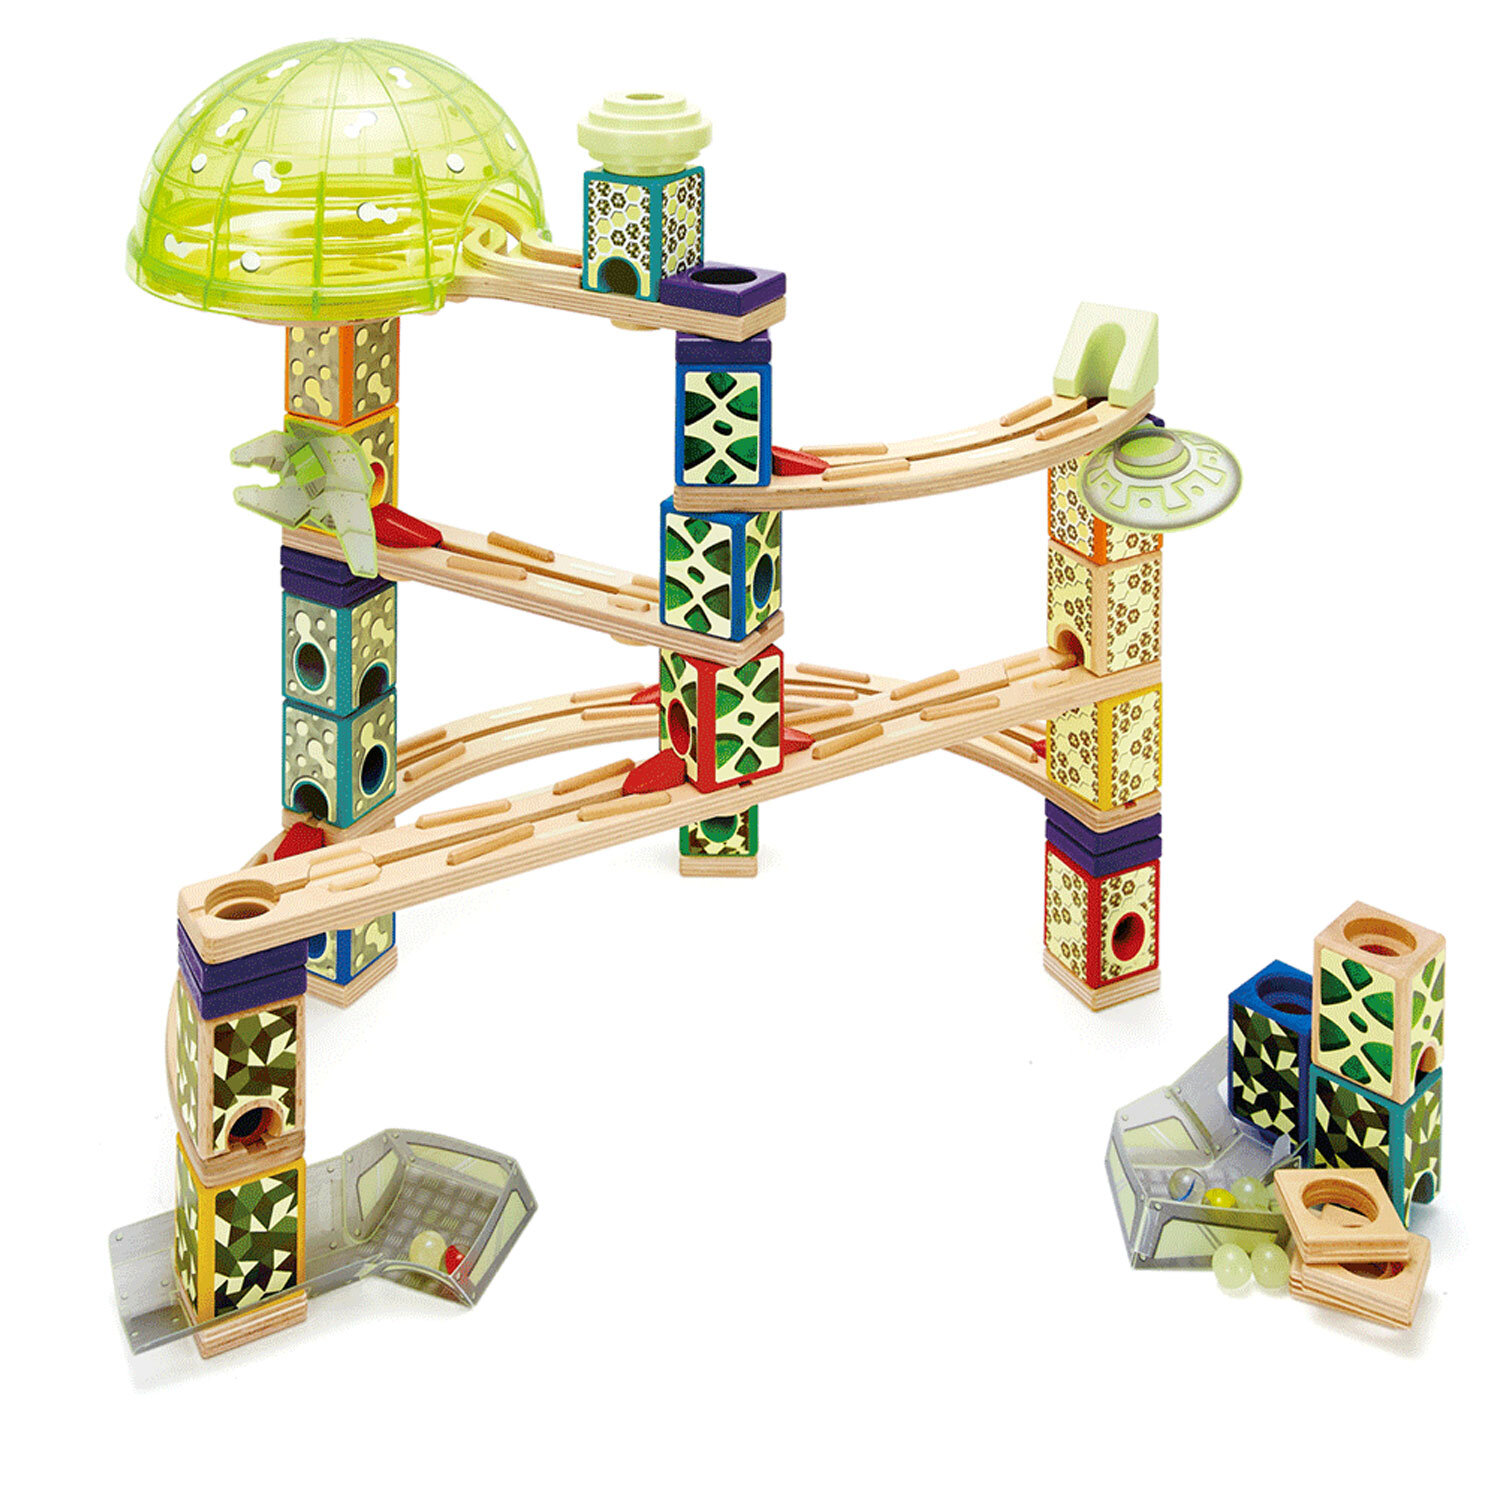 Hape Quadrilla Wooden Marble Run Construction Xcellerator Quality Time Playin 